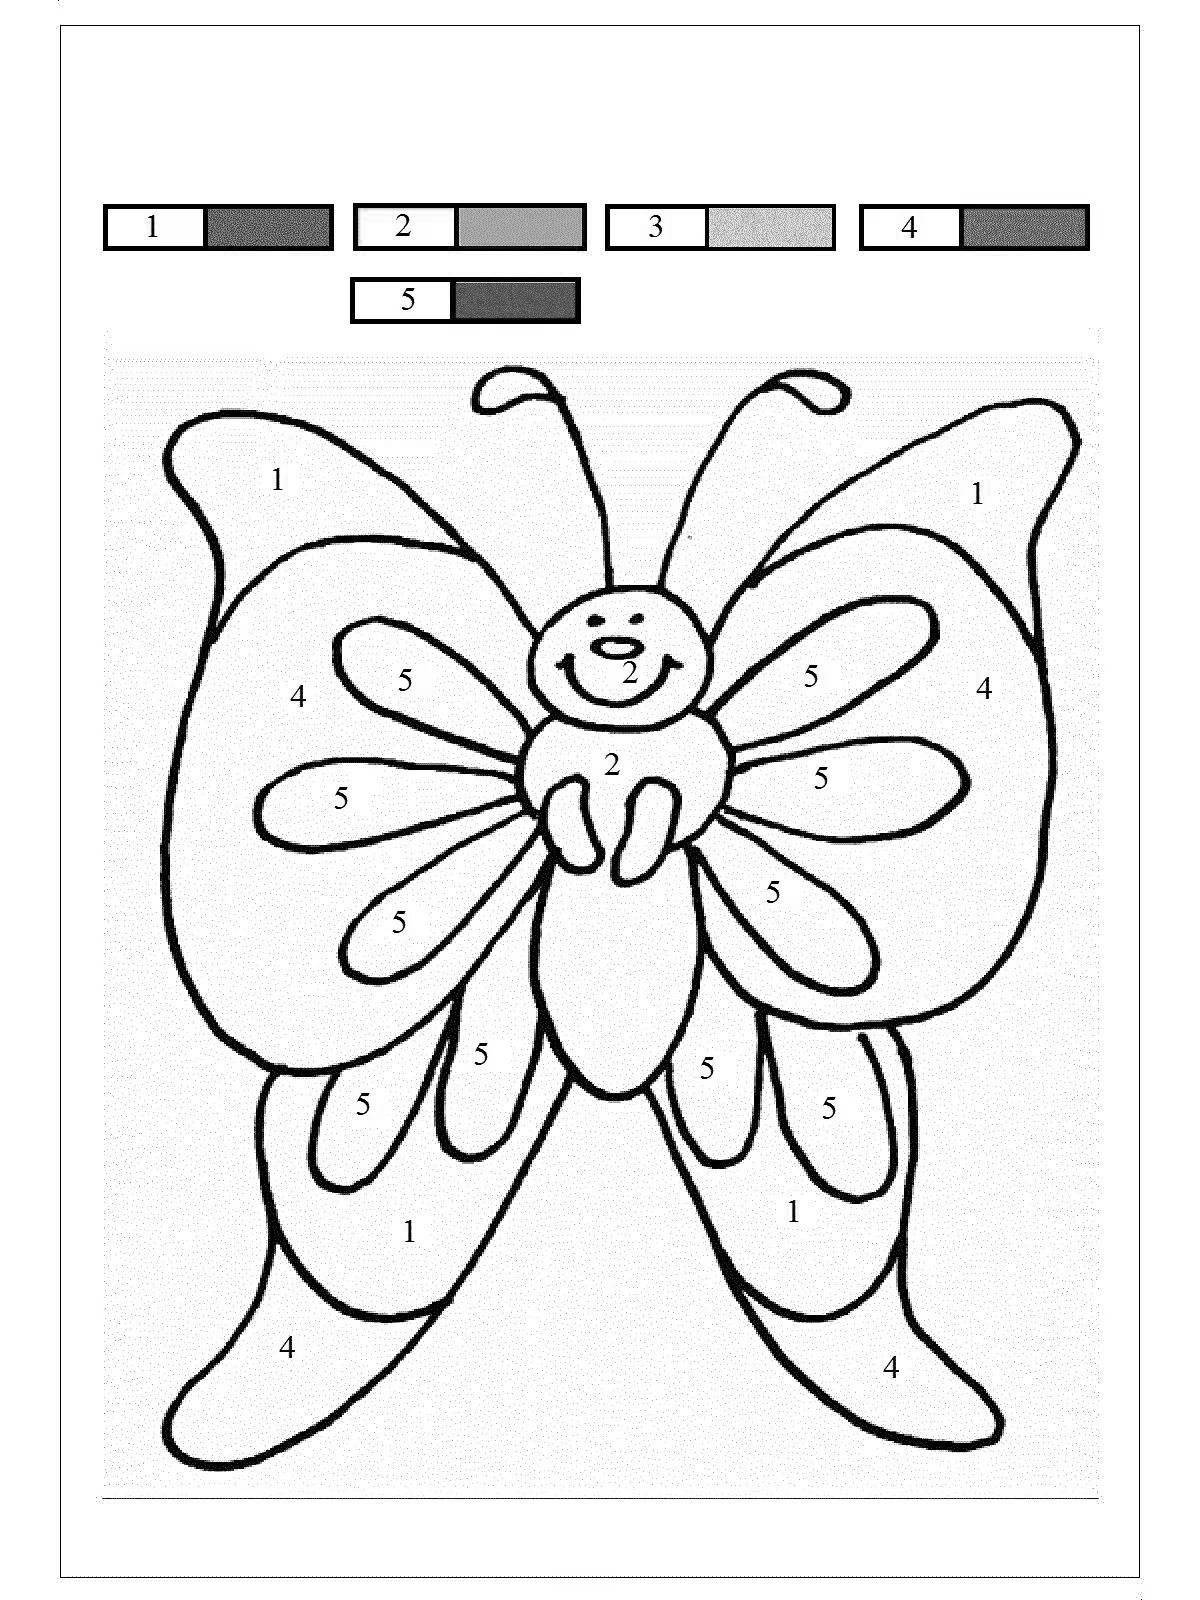 Color-mania butterfly coloring page by numbers